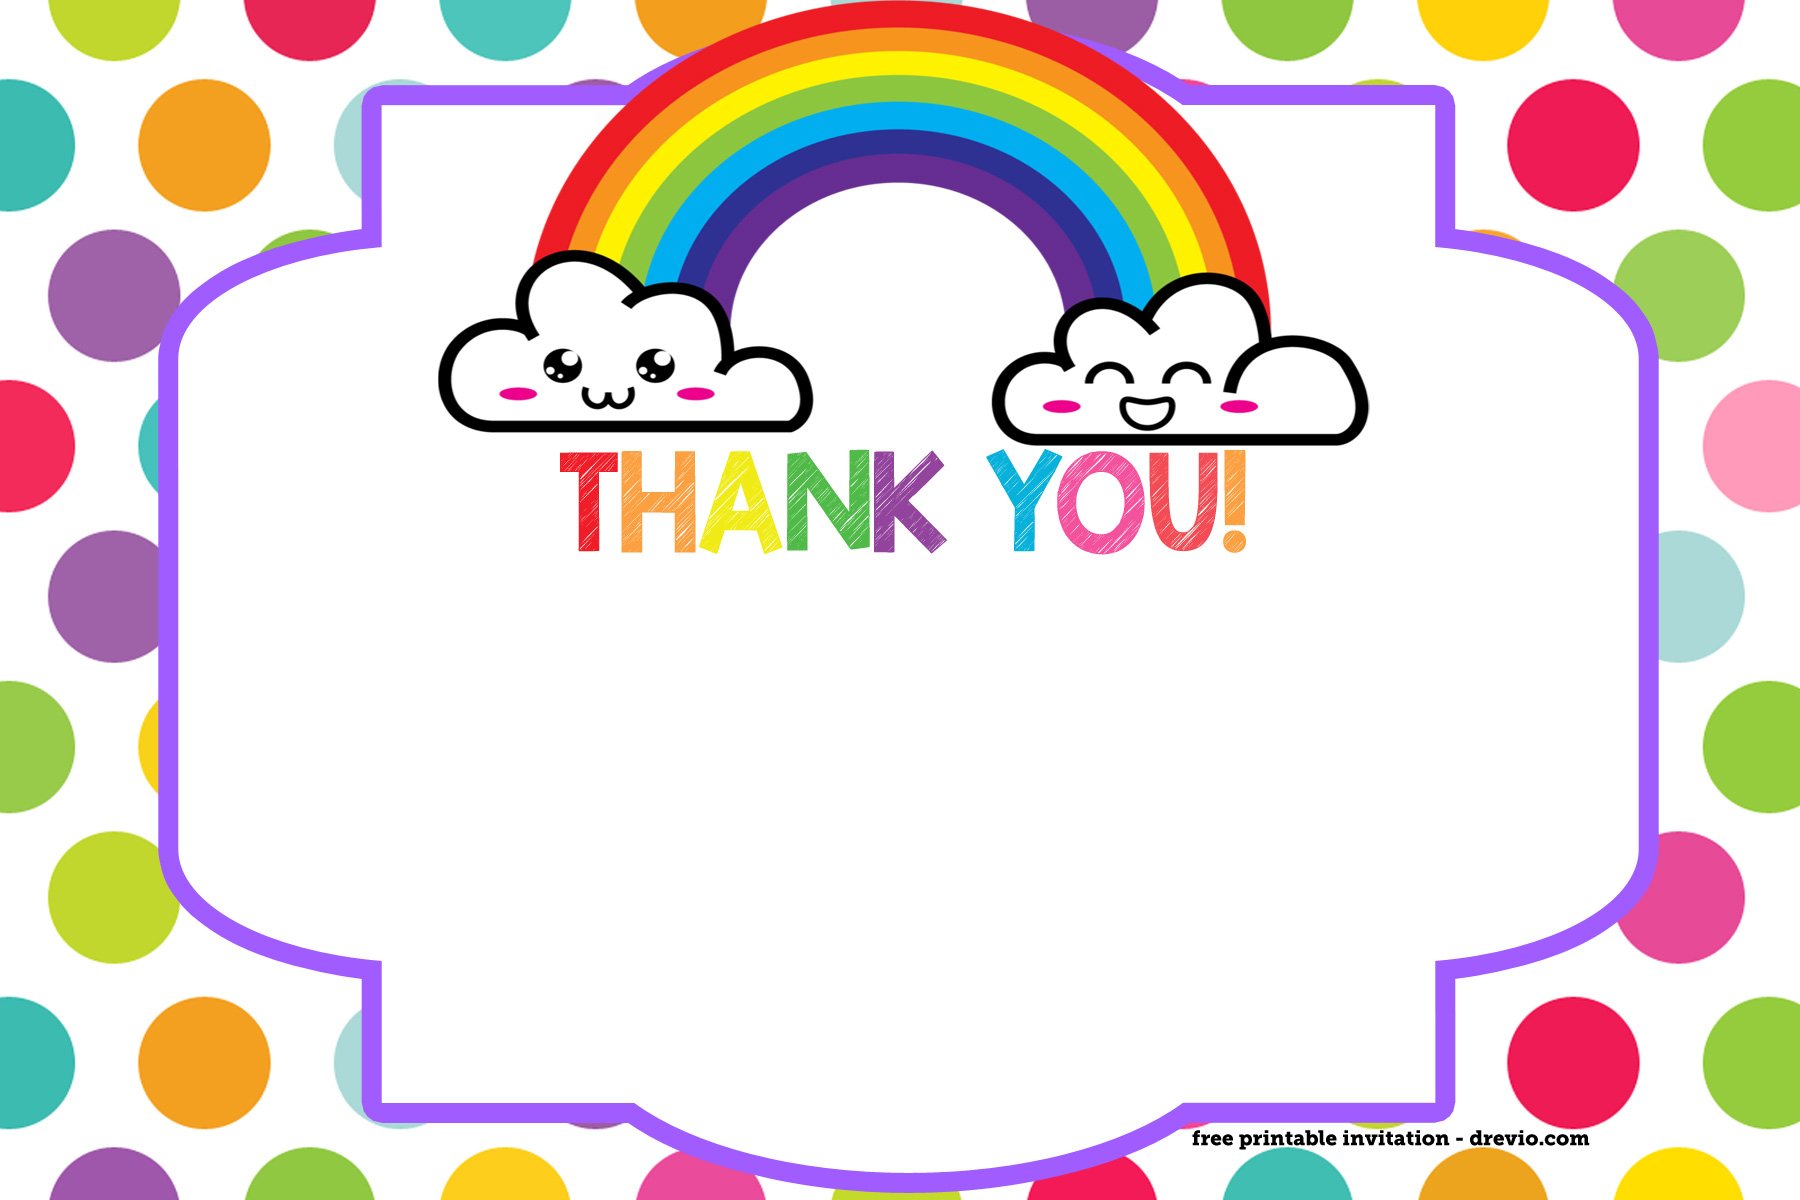 5-fun-free-printable-thank-you-cards-in-a-modern-colourful-design-birthday-thank-you-card